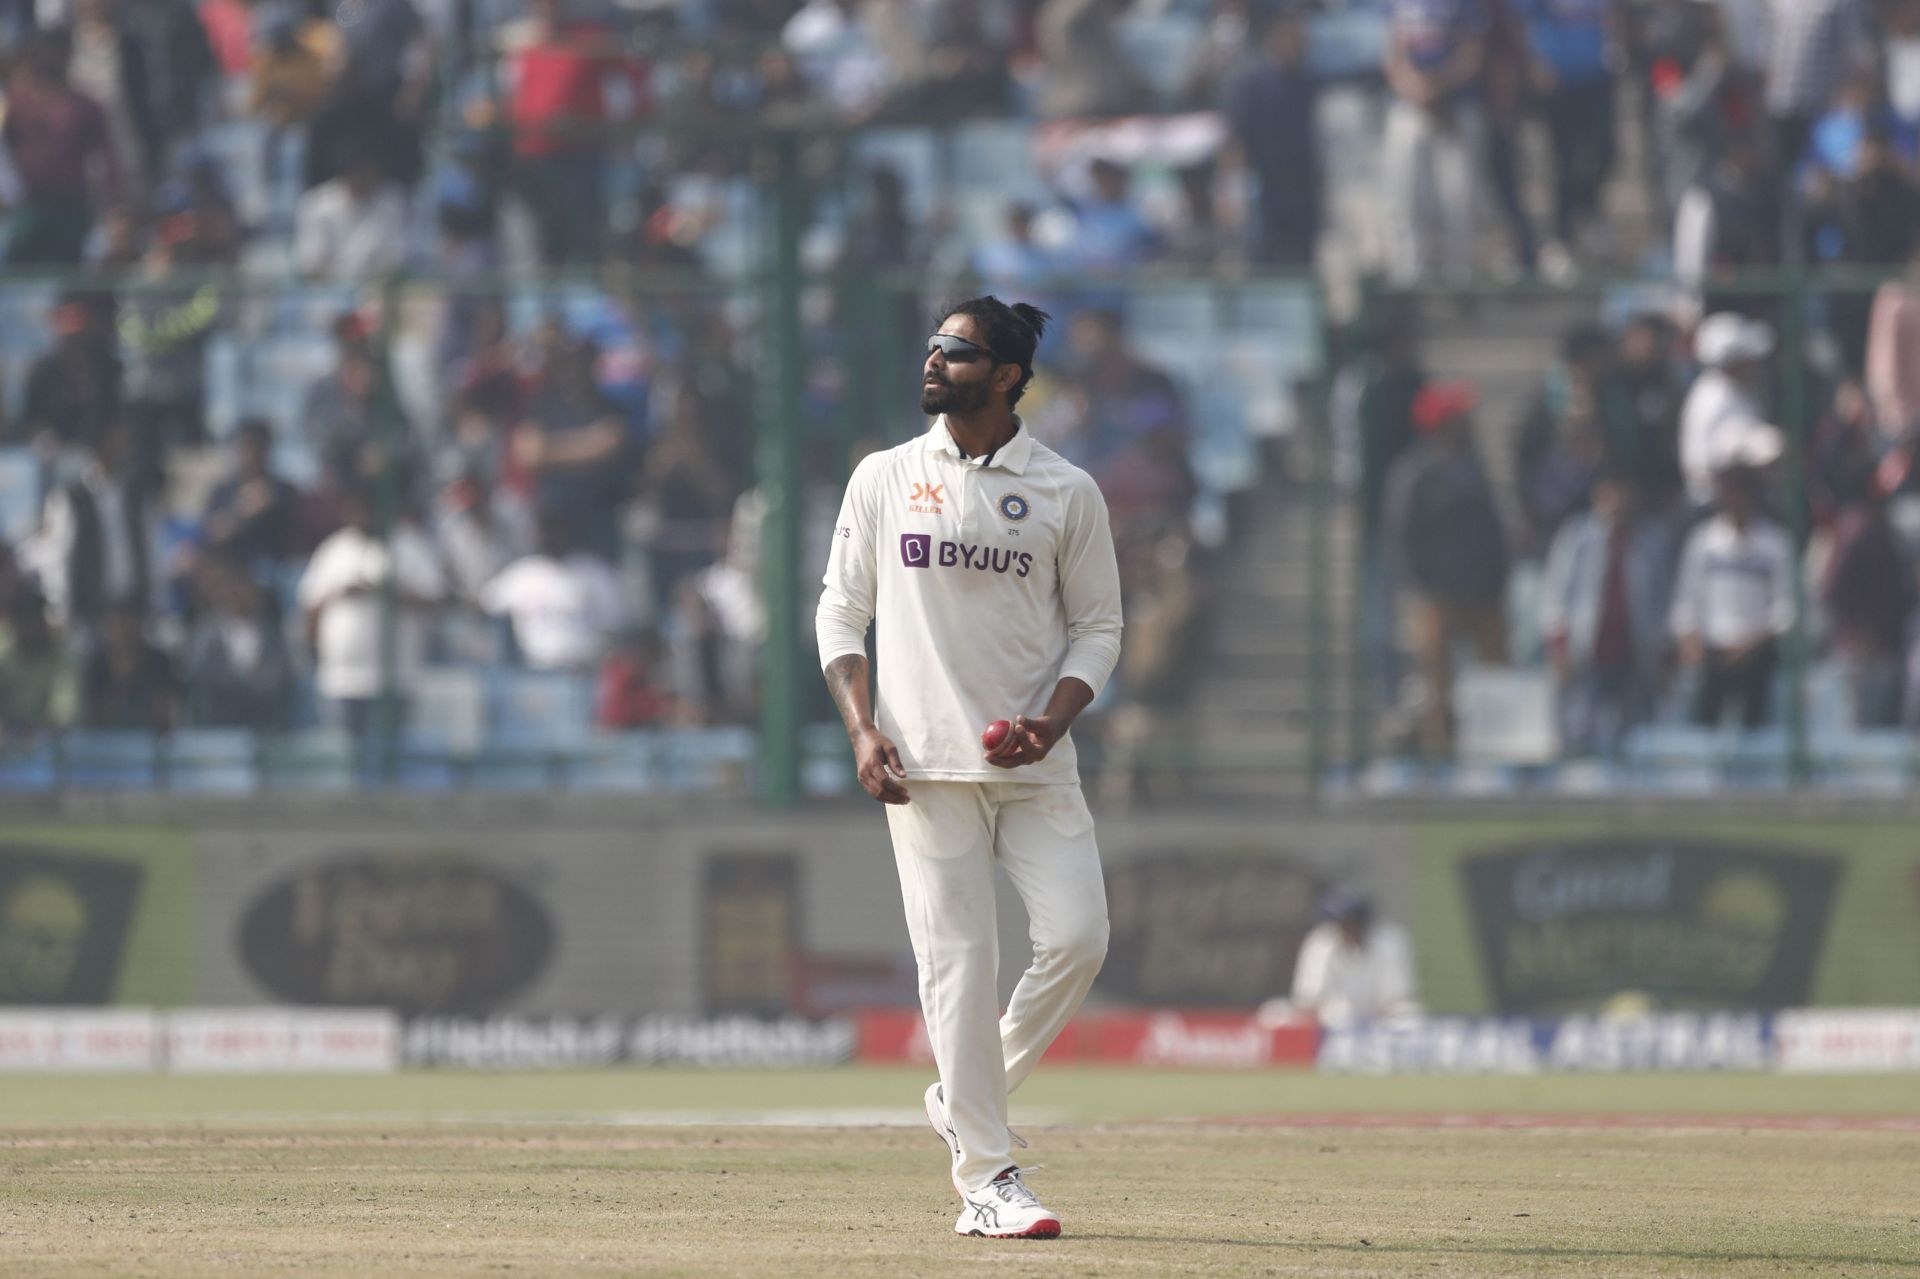 Ravindra Jadeja carried on from where he left off in the first Test with another scintillating display